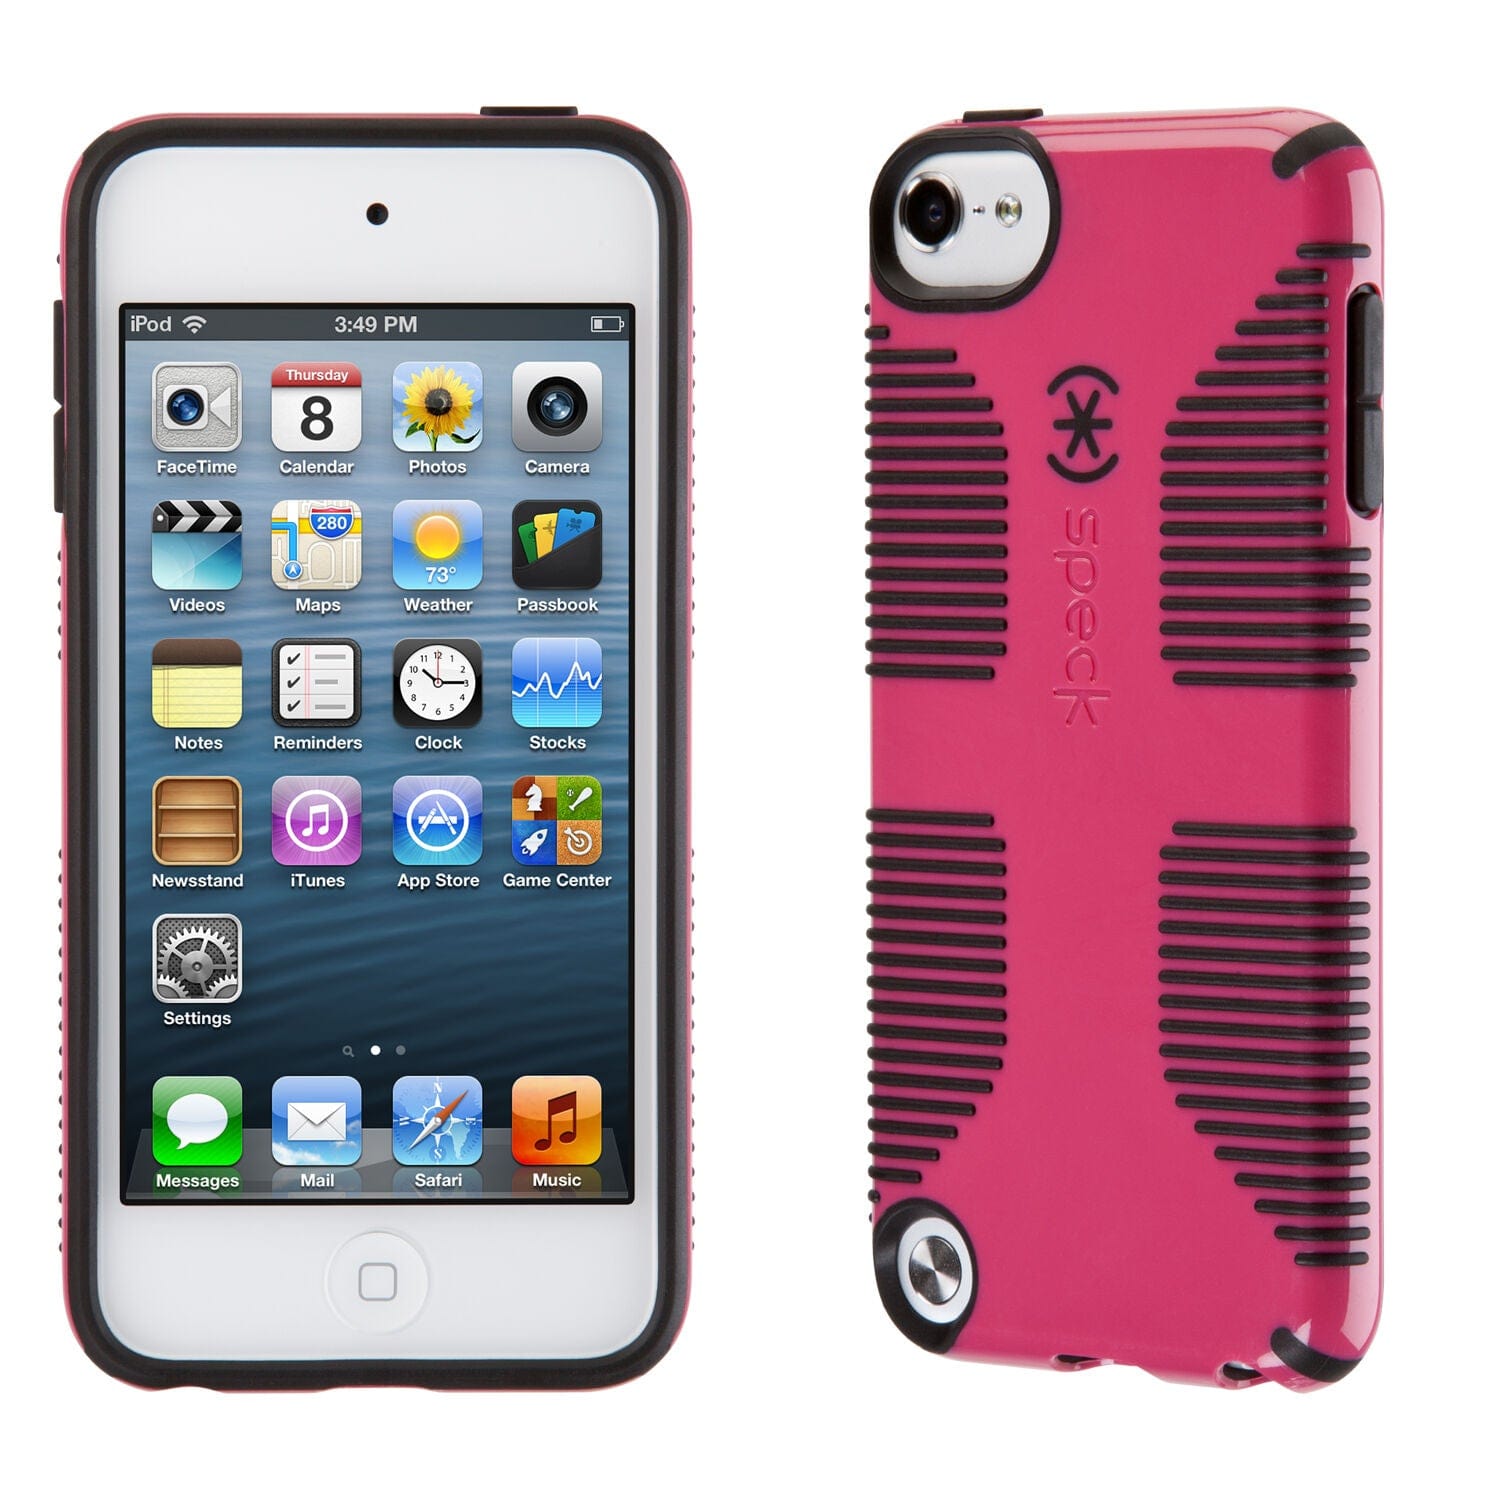 Europa begin salaris Speck CandyShell Grip iPod Touch 6G & 5G Cases Best iPod Touch 6G & 5G -  $29.95